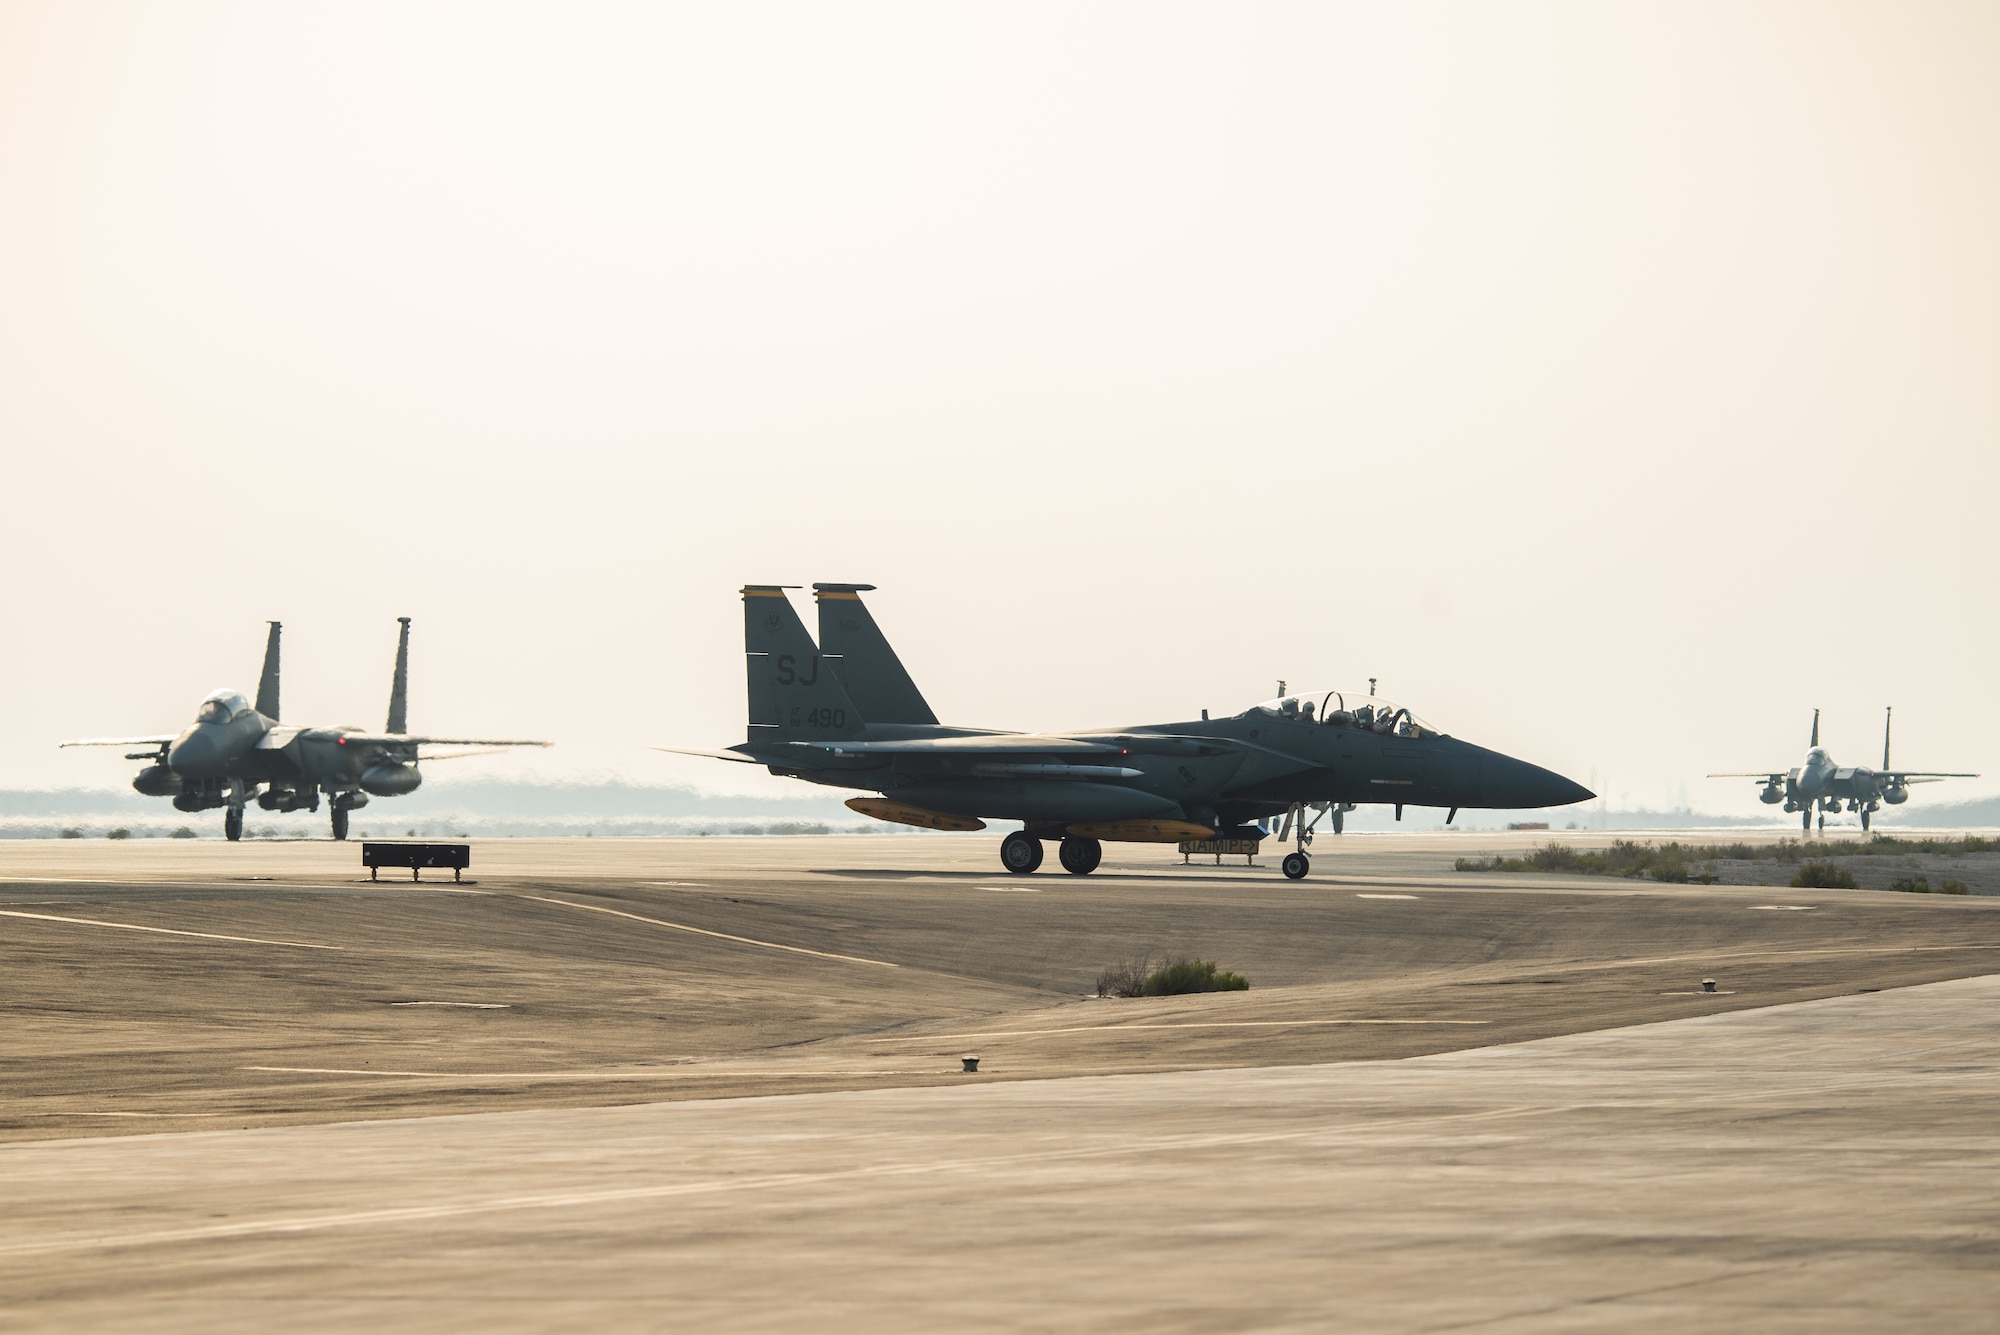 Three F-15E Strike Eagles from the 336th Fighter Squadron, 4th Fighter Wing at Seymour Johnson Air Force Base, North Carolina, taxi the runway at Al Dhafra Air Base, United Arab Emirates, June 13, 2019. The F-15E’s joined ADABs inventory of other fighters to include F-15C Eagles and F-35A Lightning IIs. (U.S. Air Force photo by Staff Sgt. Chris Thornbury)